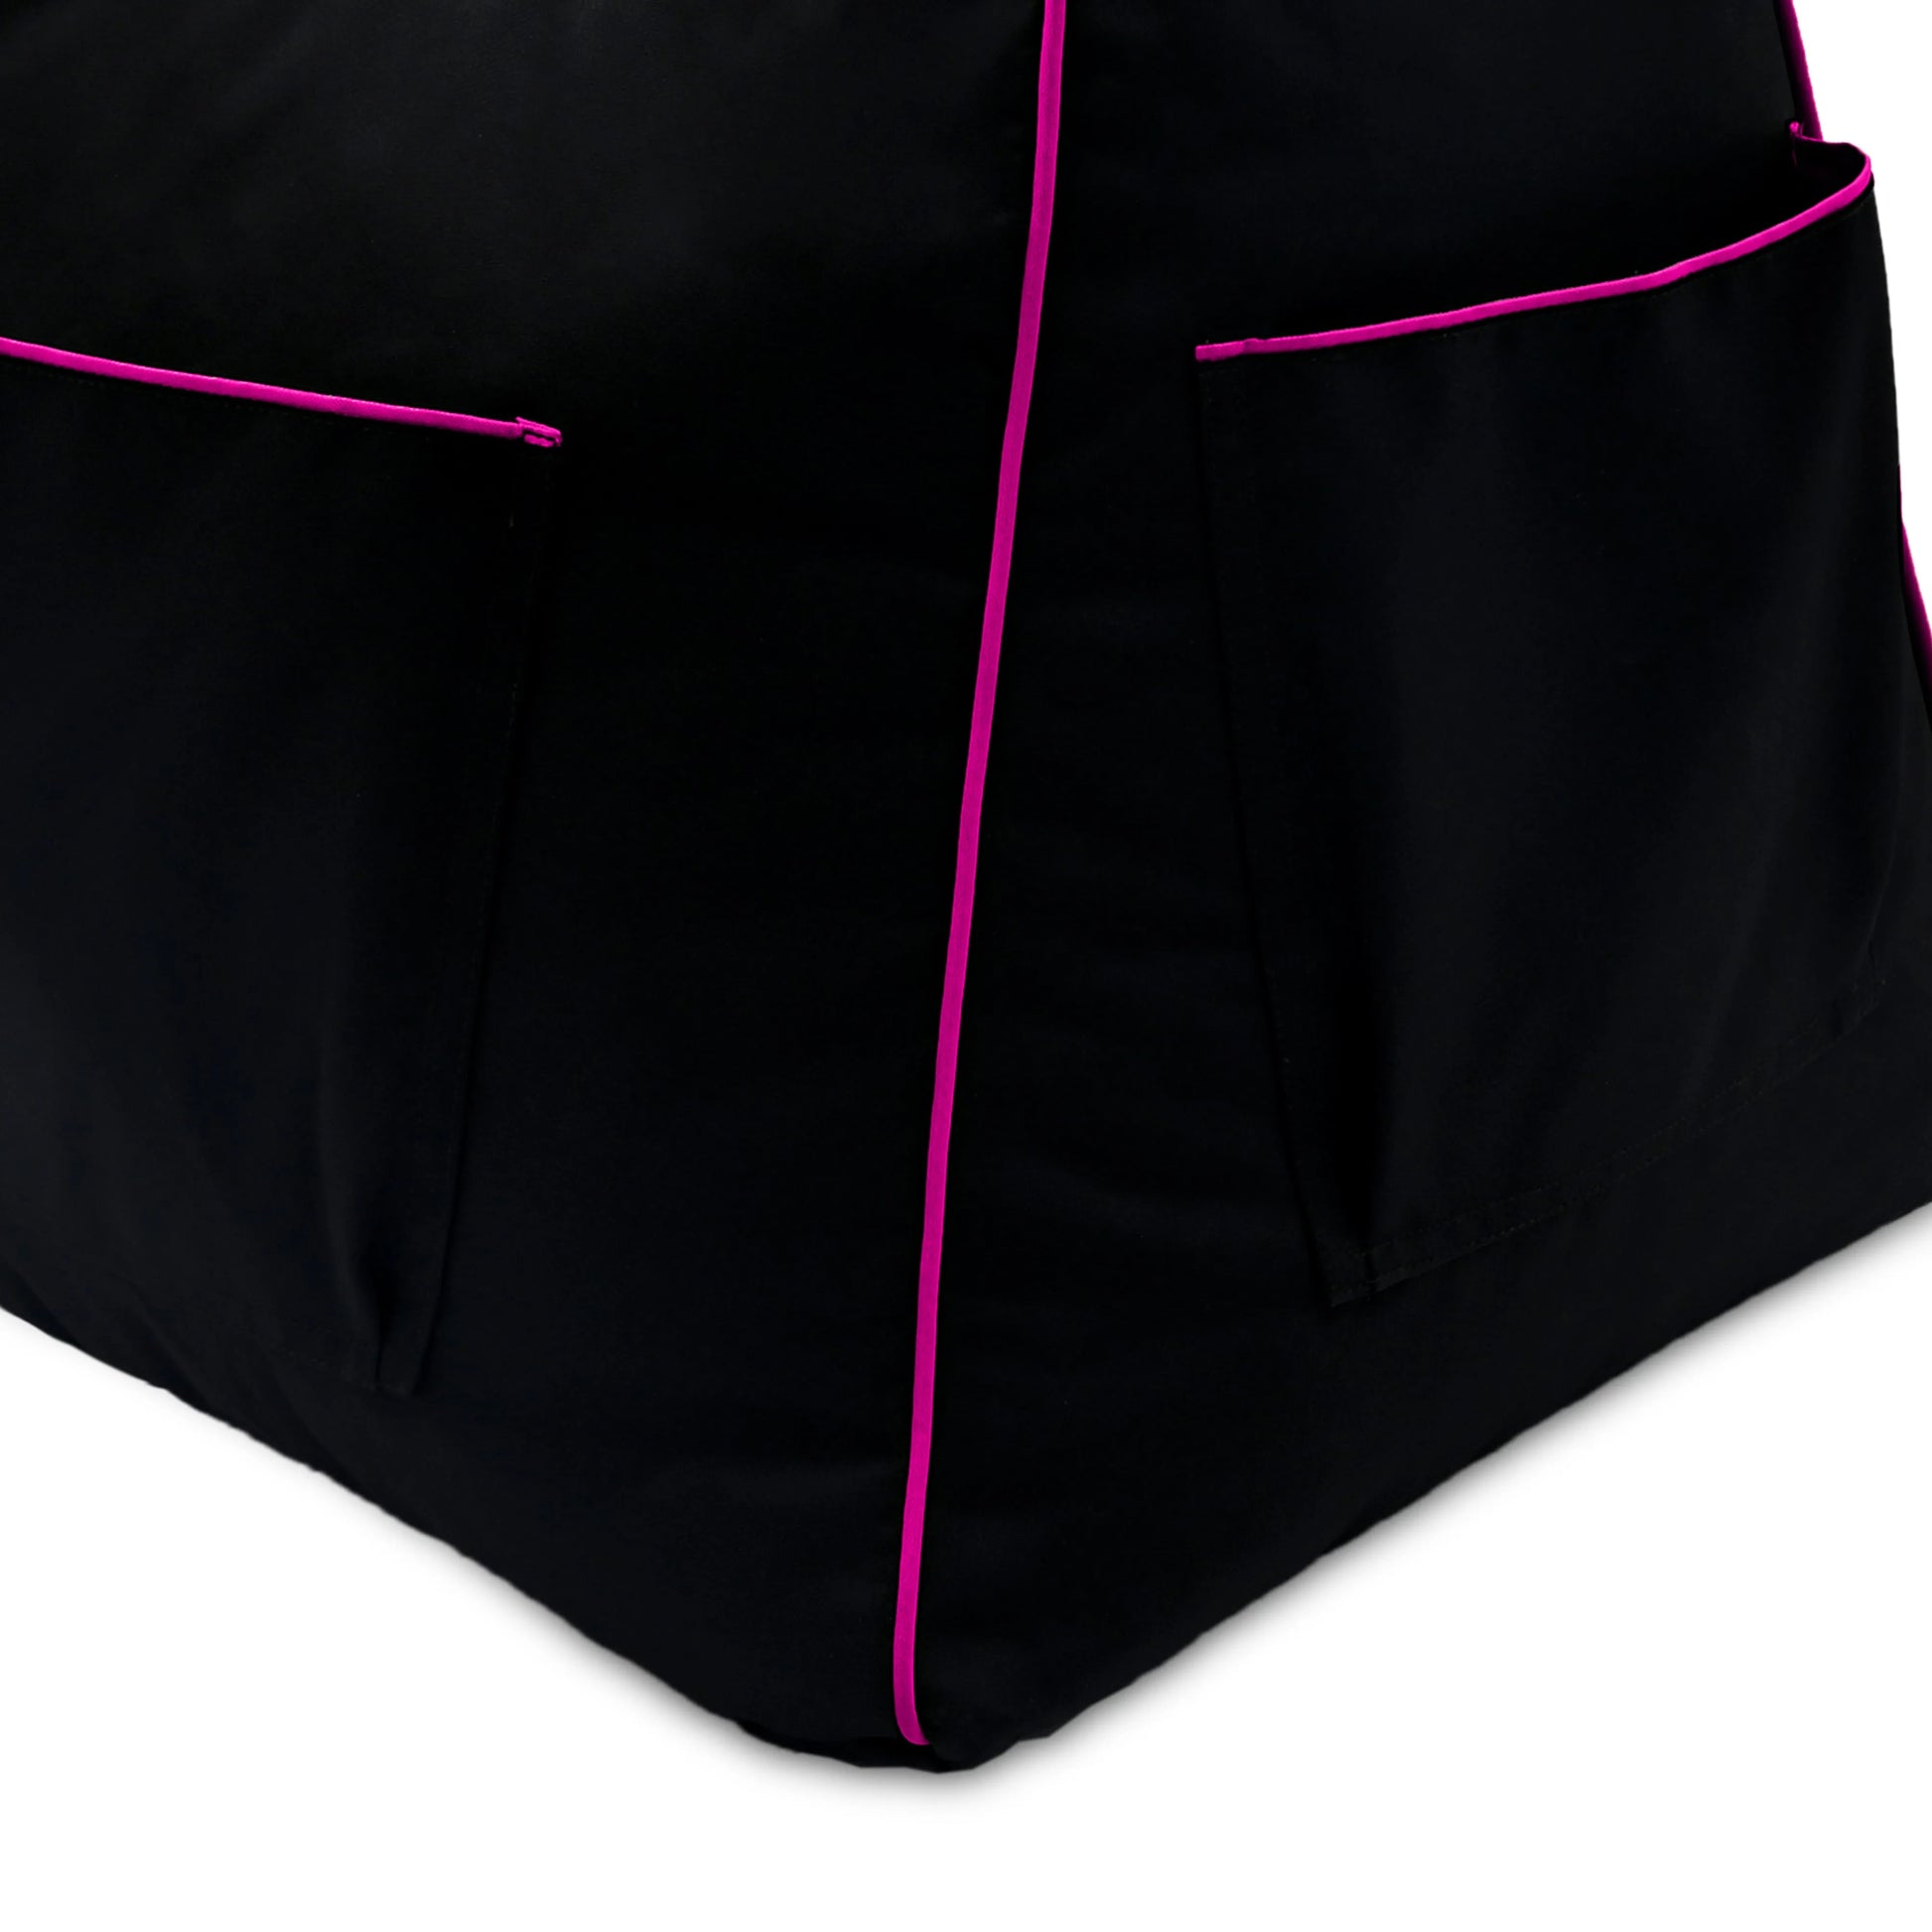 A black bean bag cover with a pink stripe.